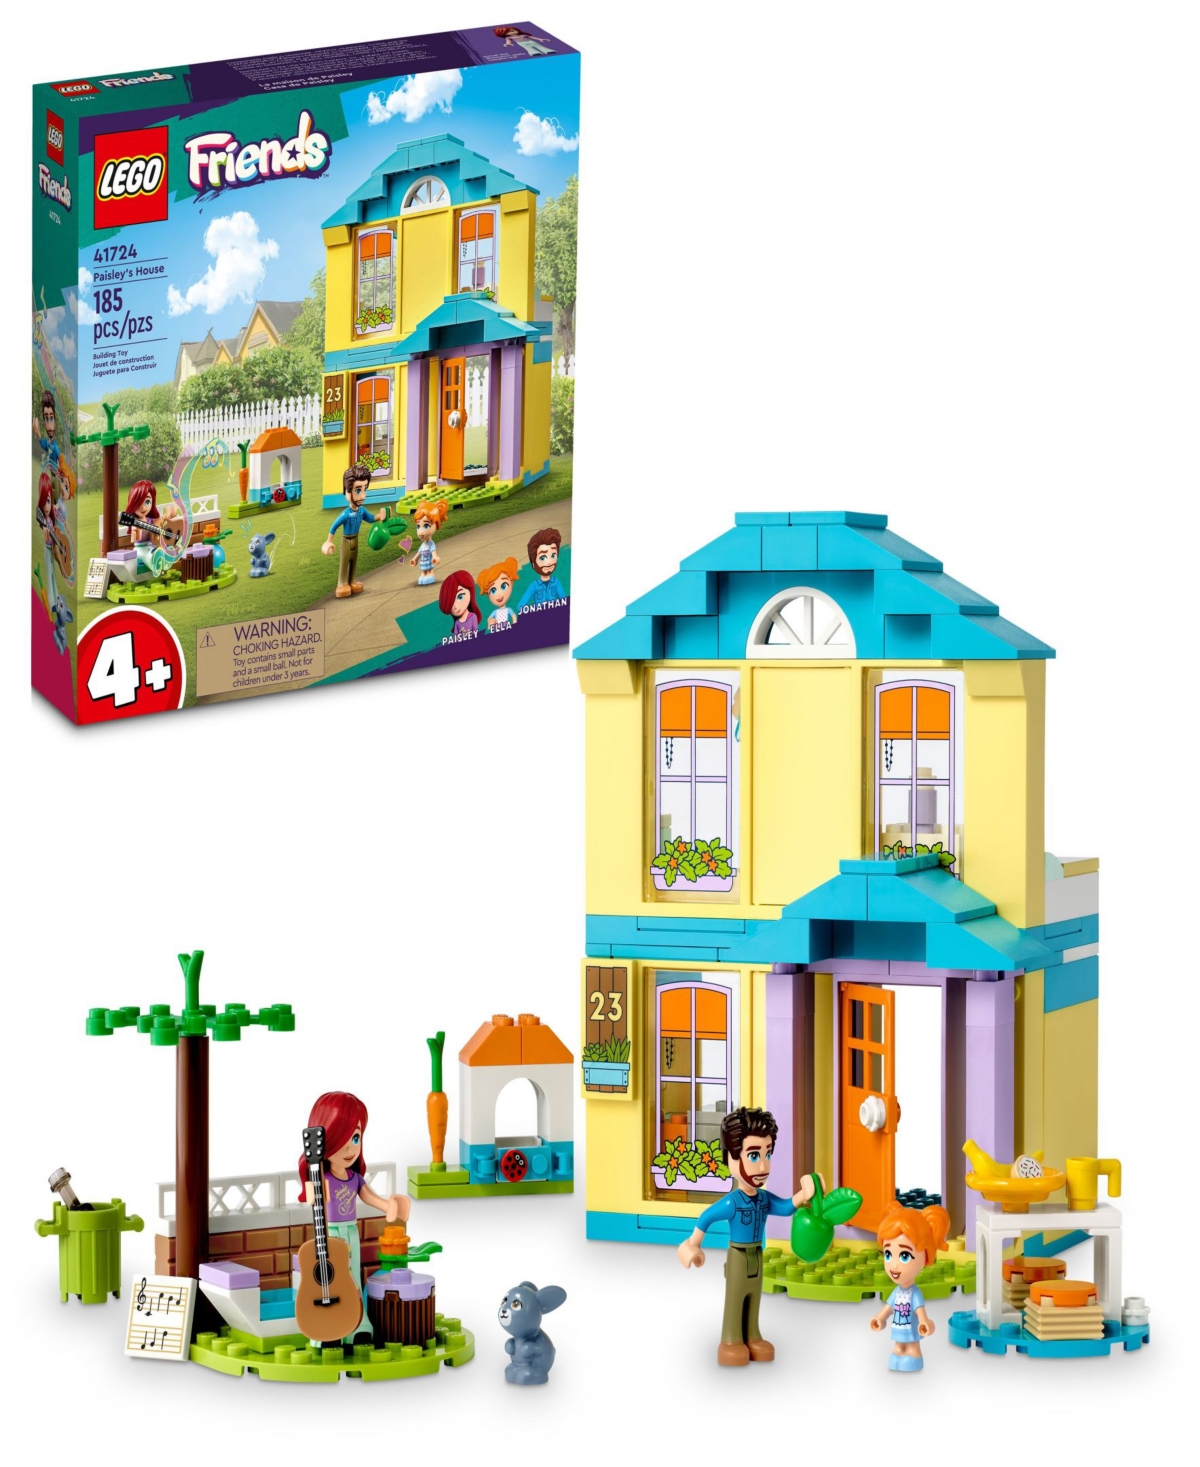 Lego Friends Paisley's House 41724 Toy Building Set With Paisley, Ella And Jonathan Figures In Multicolor